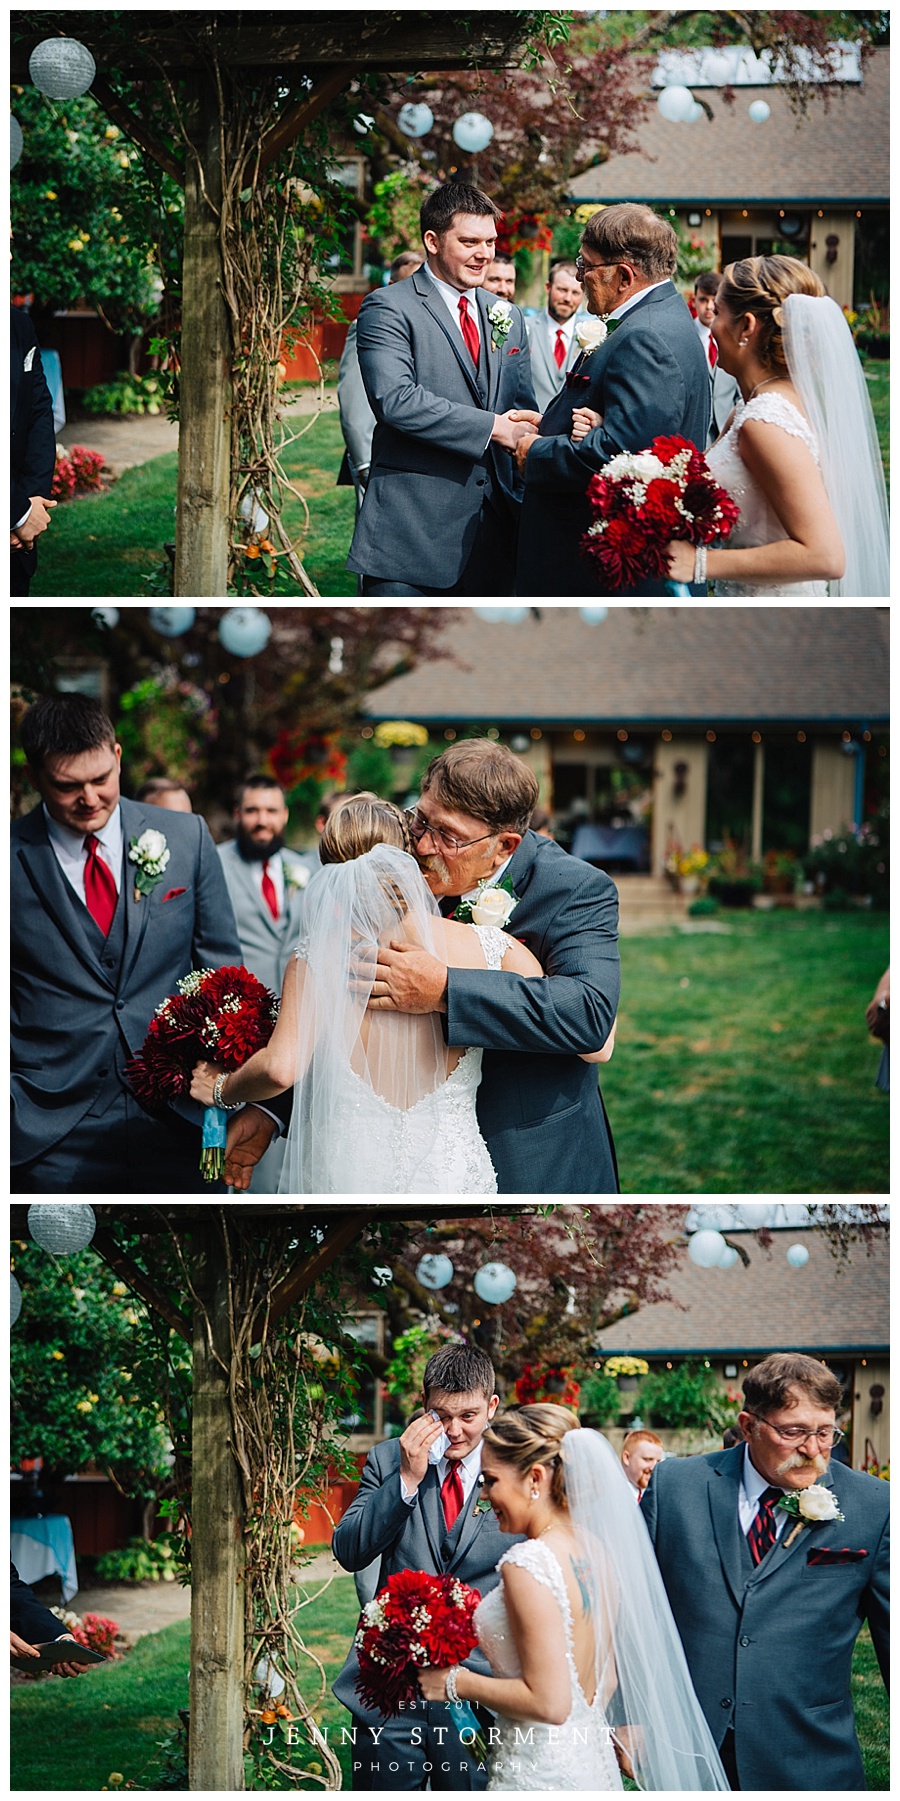 albees-garden-party-wedding-photos-by-jenny-storment-photography-43